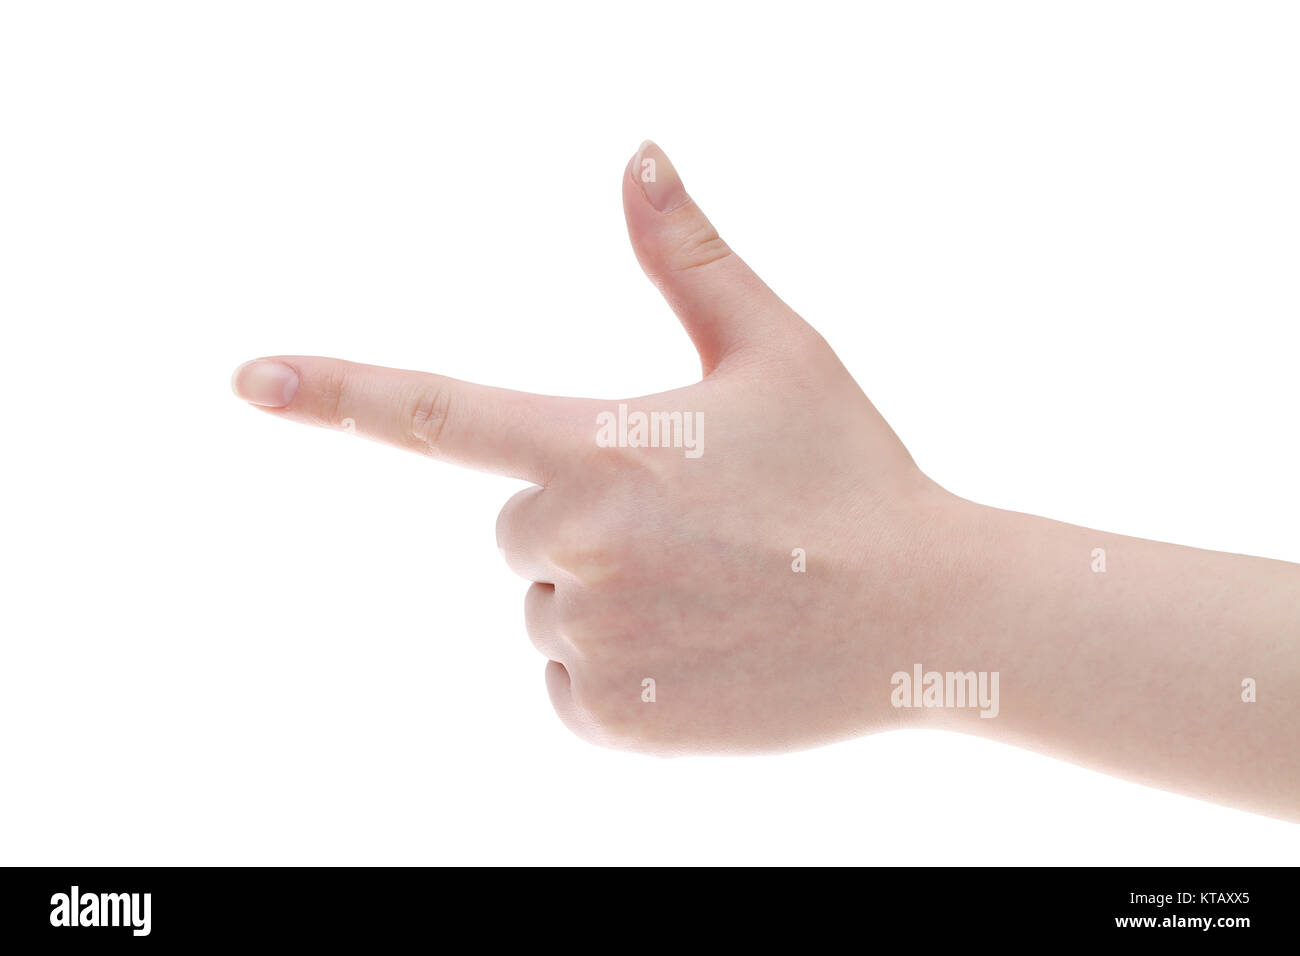 Body parts hand thumb Cut Out Stock Images & Pictures - Alamy